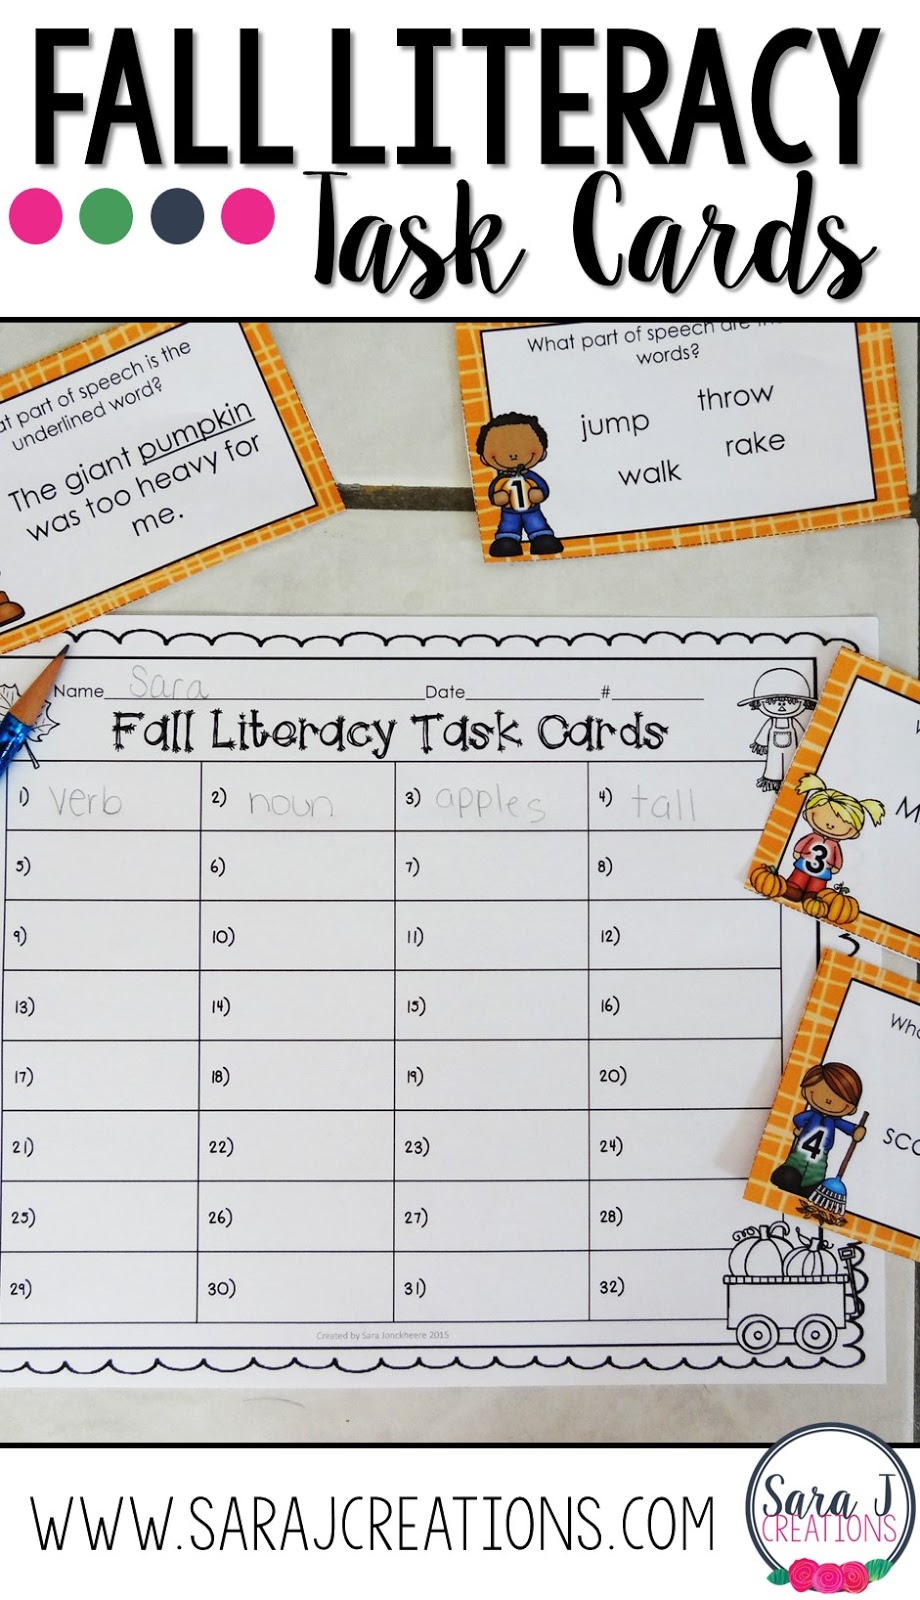 Literacy task cards are ideal for small groups, early finishers or the whole class.  Easy to implement and a fun fall theme makes it great to use seasonally. 